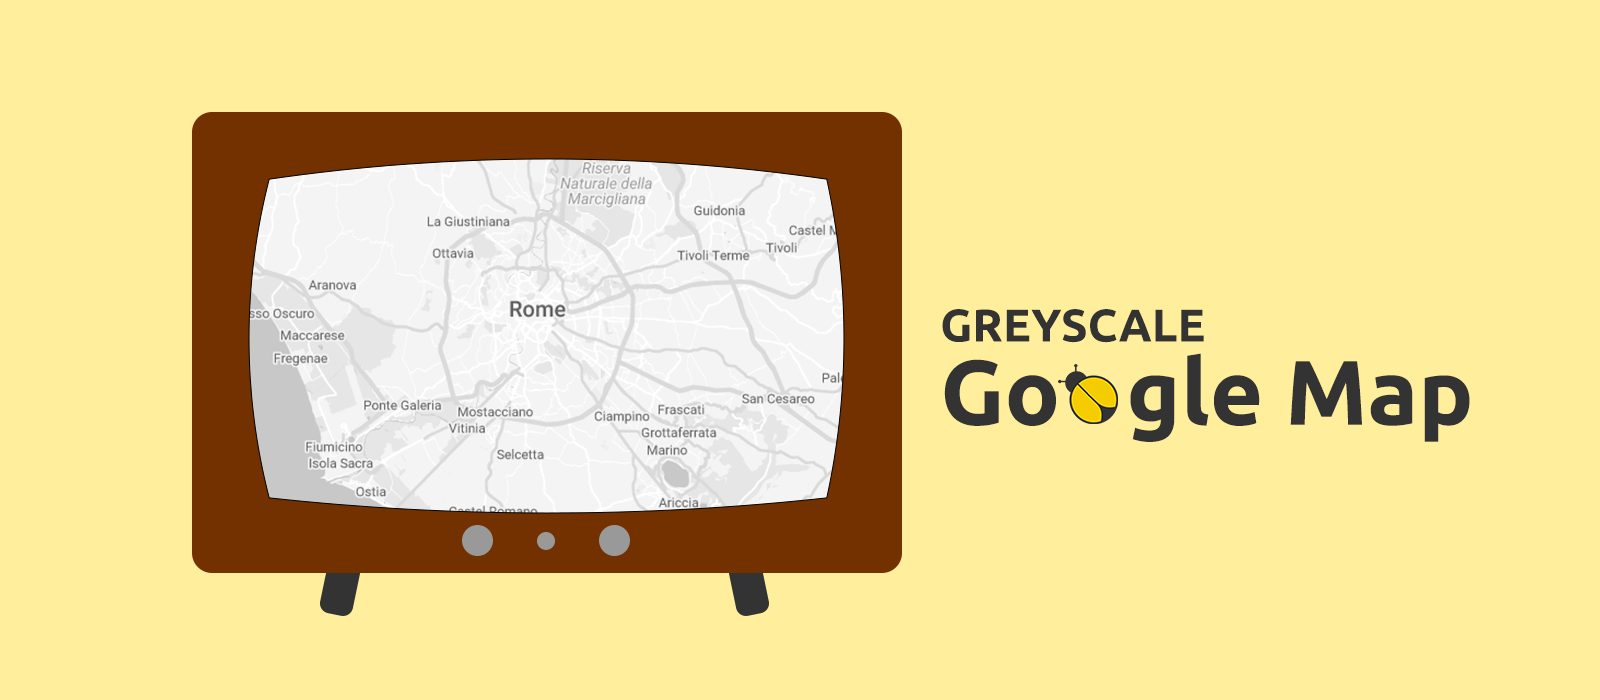 How to Turn Greyscale an Interactive or Static Google Map